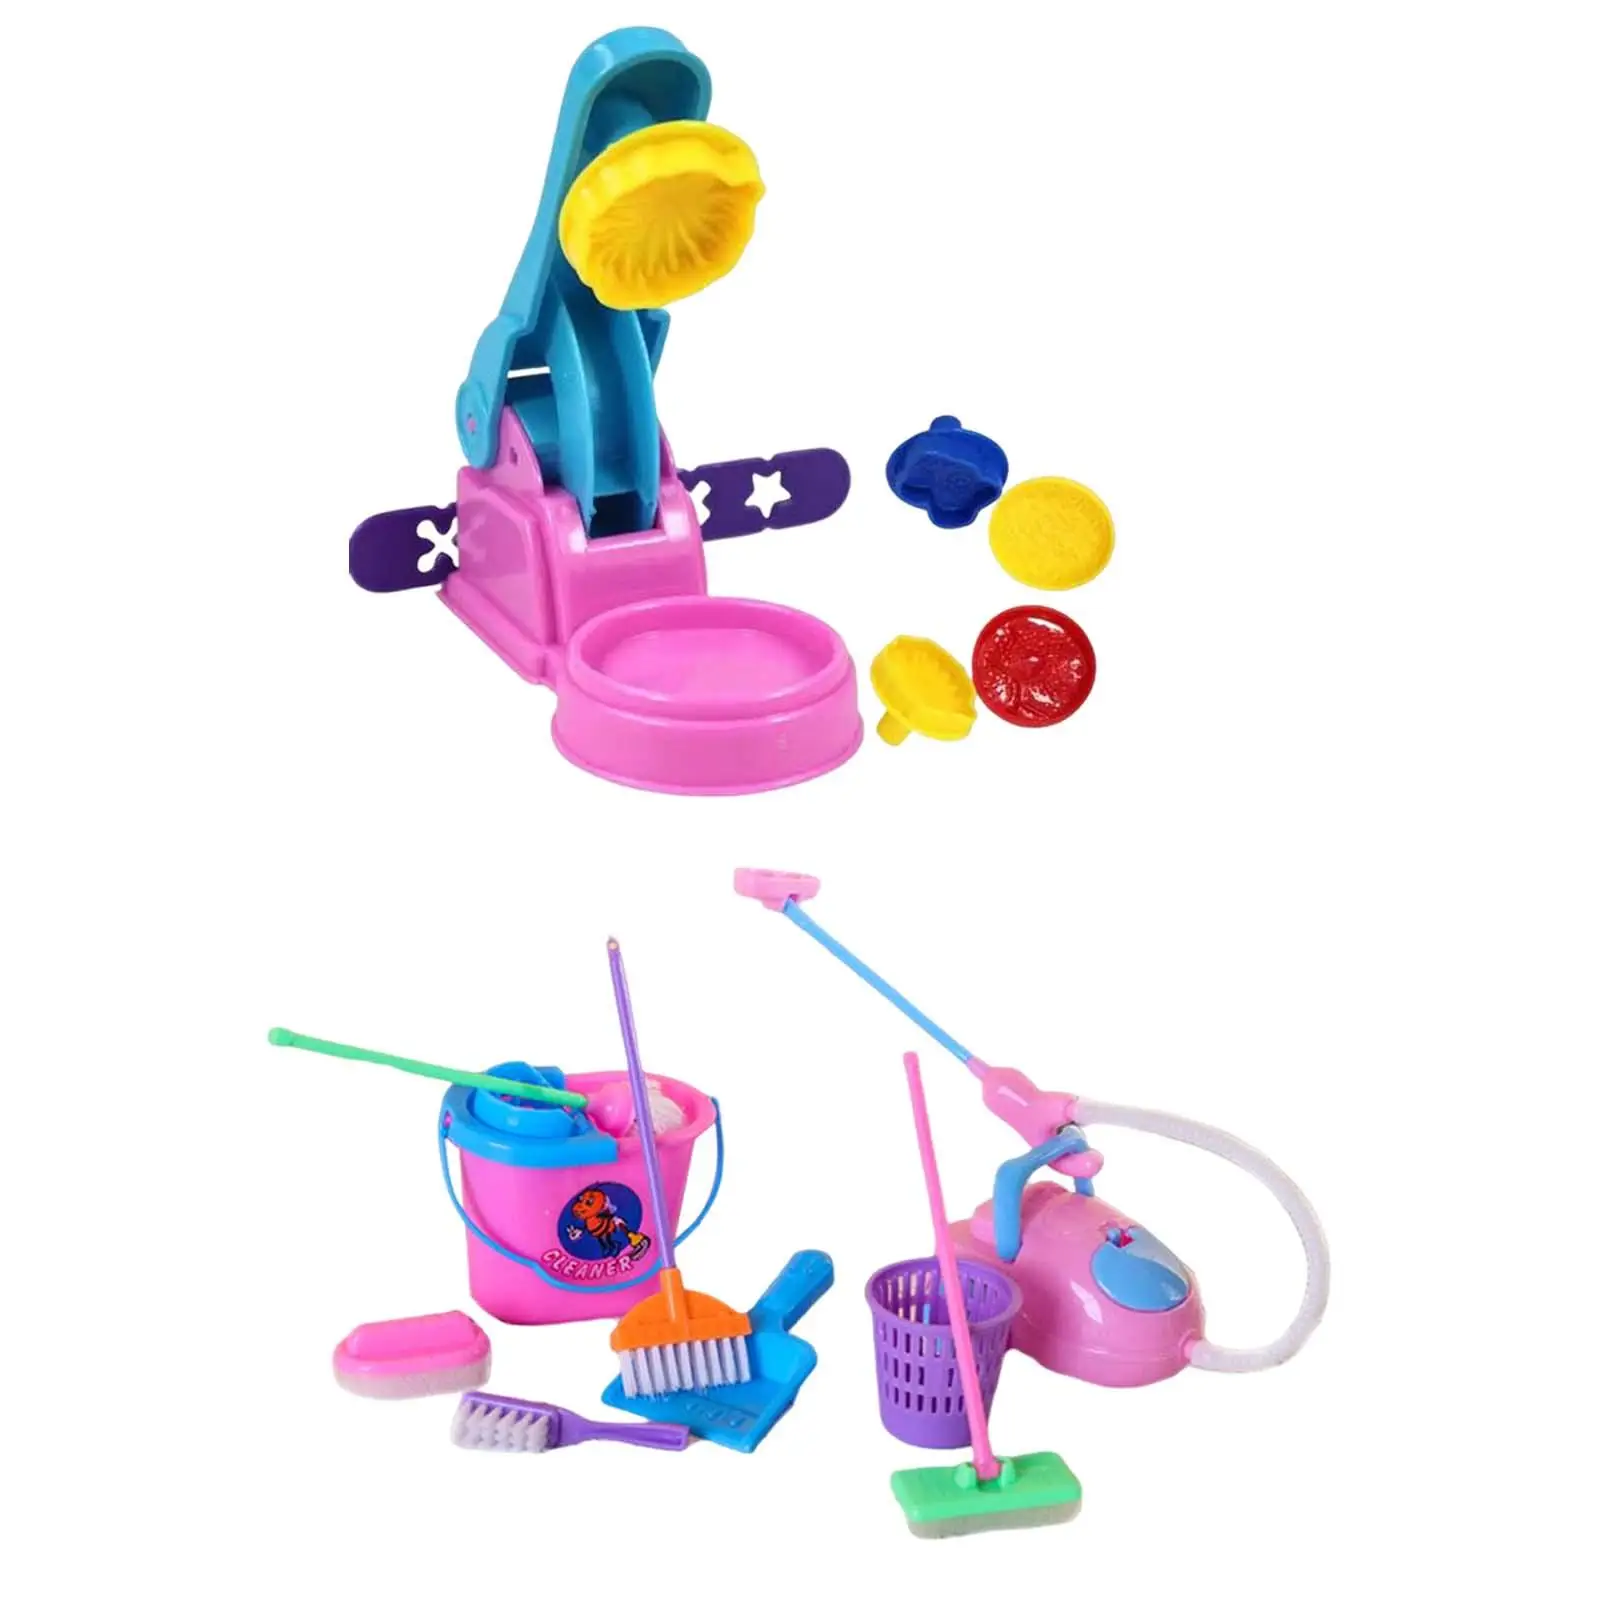 

Kids Housework Toy Early Educational Toy Developmental for Holiday Gifts